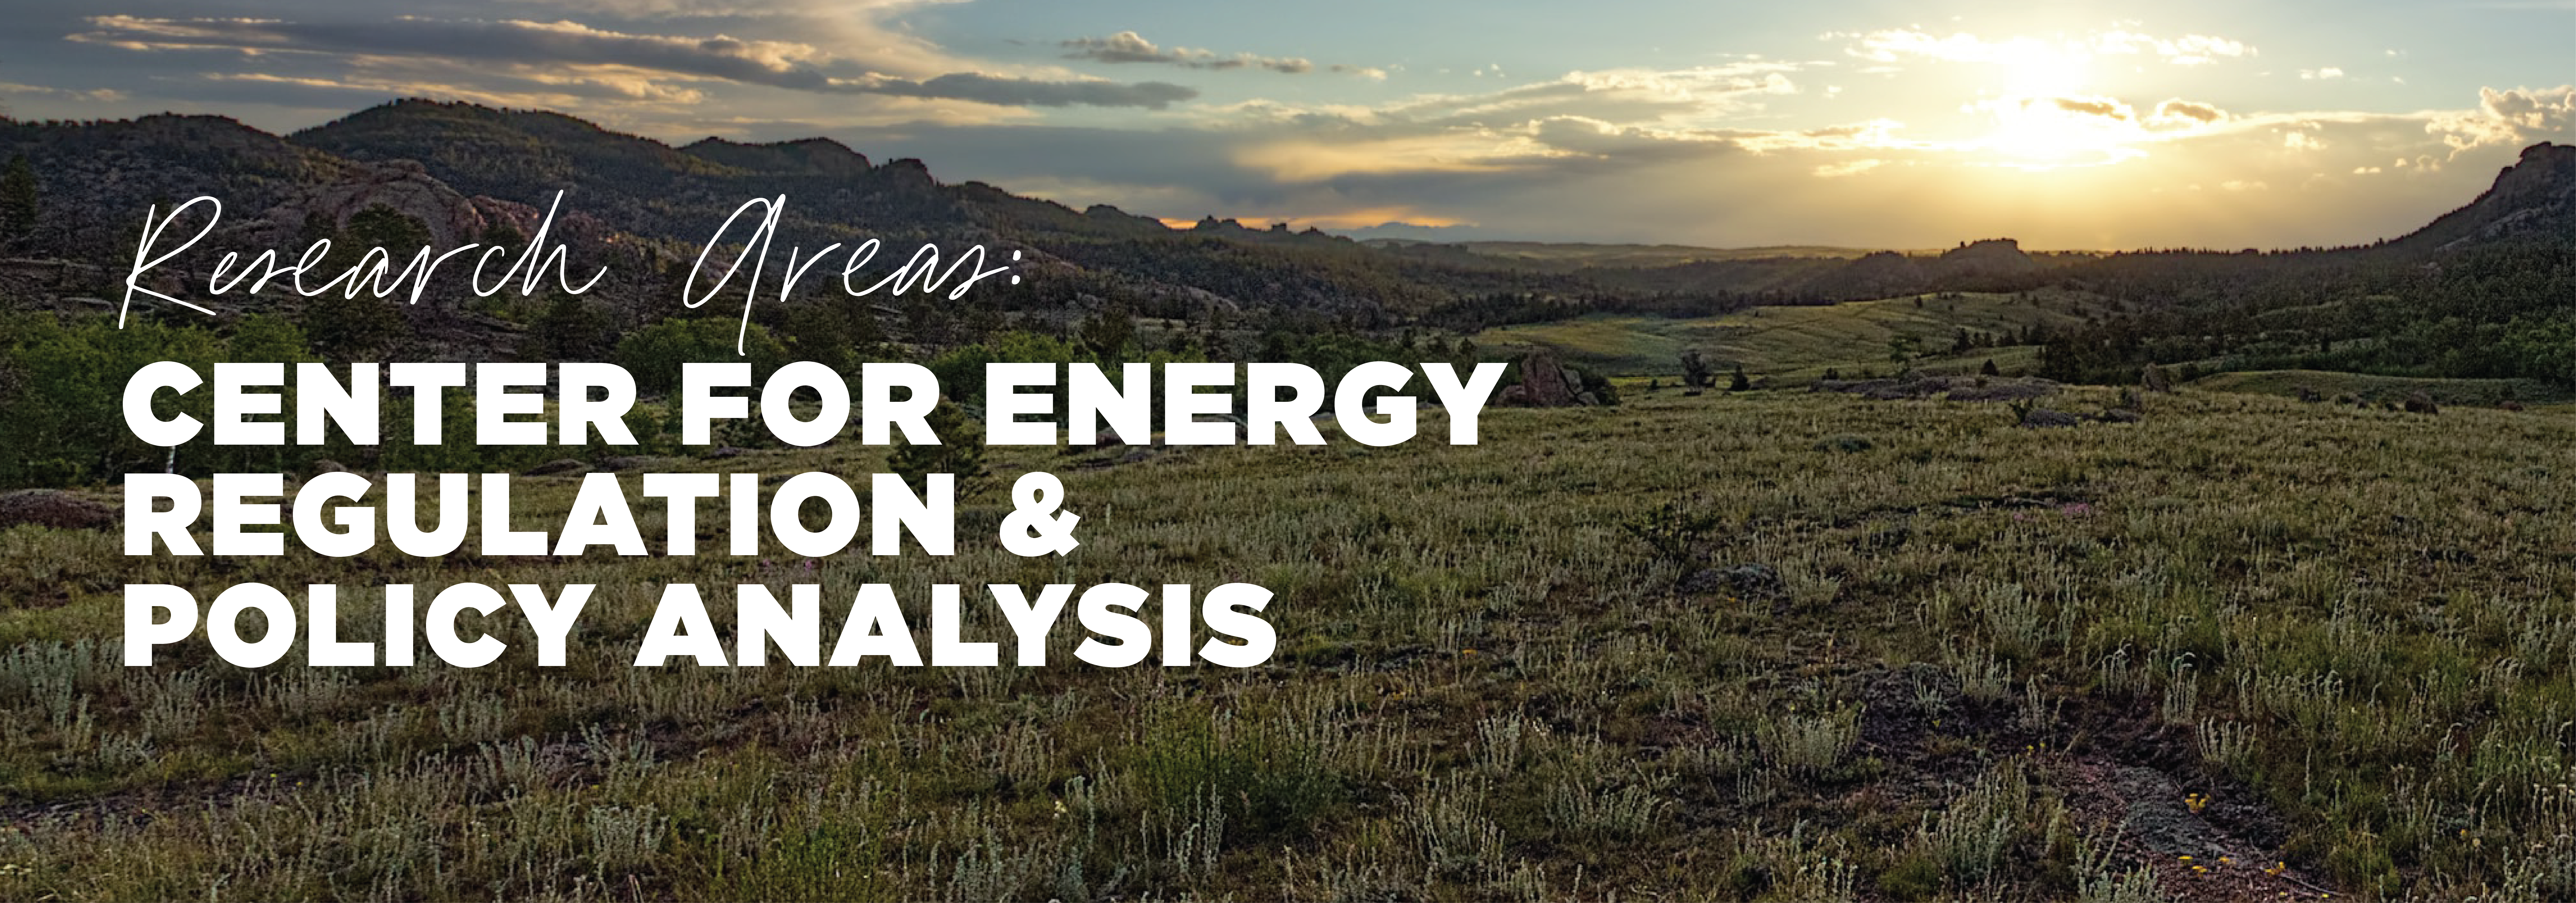 Research areas: Center for Energy Regulation and Policy Analysis over research samples